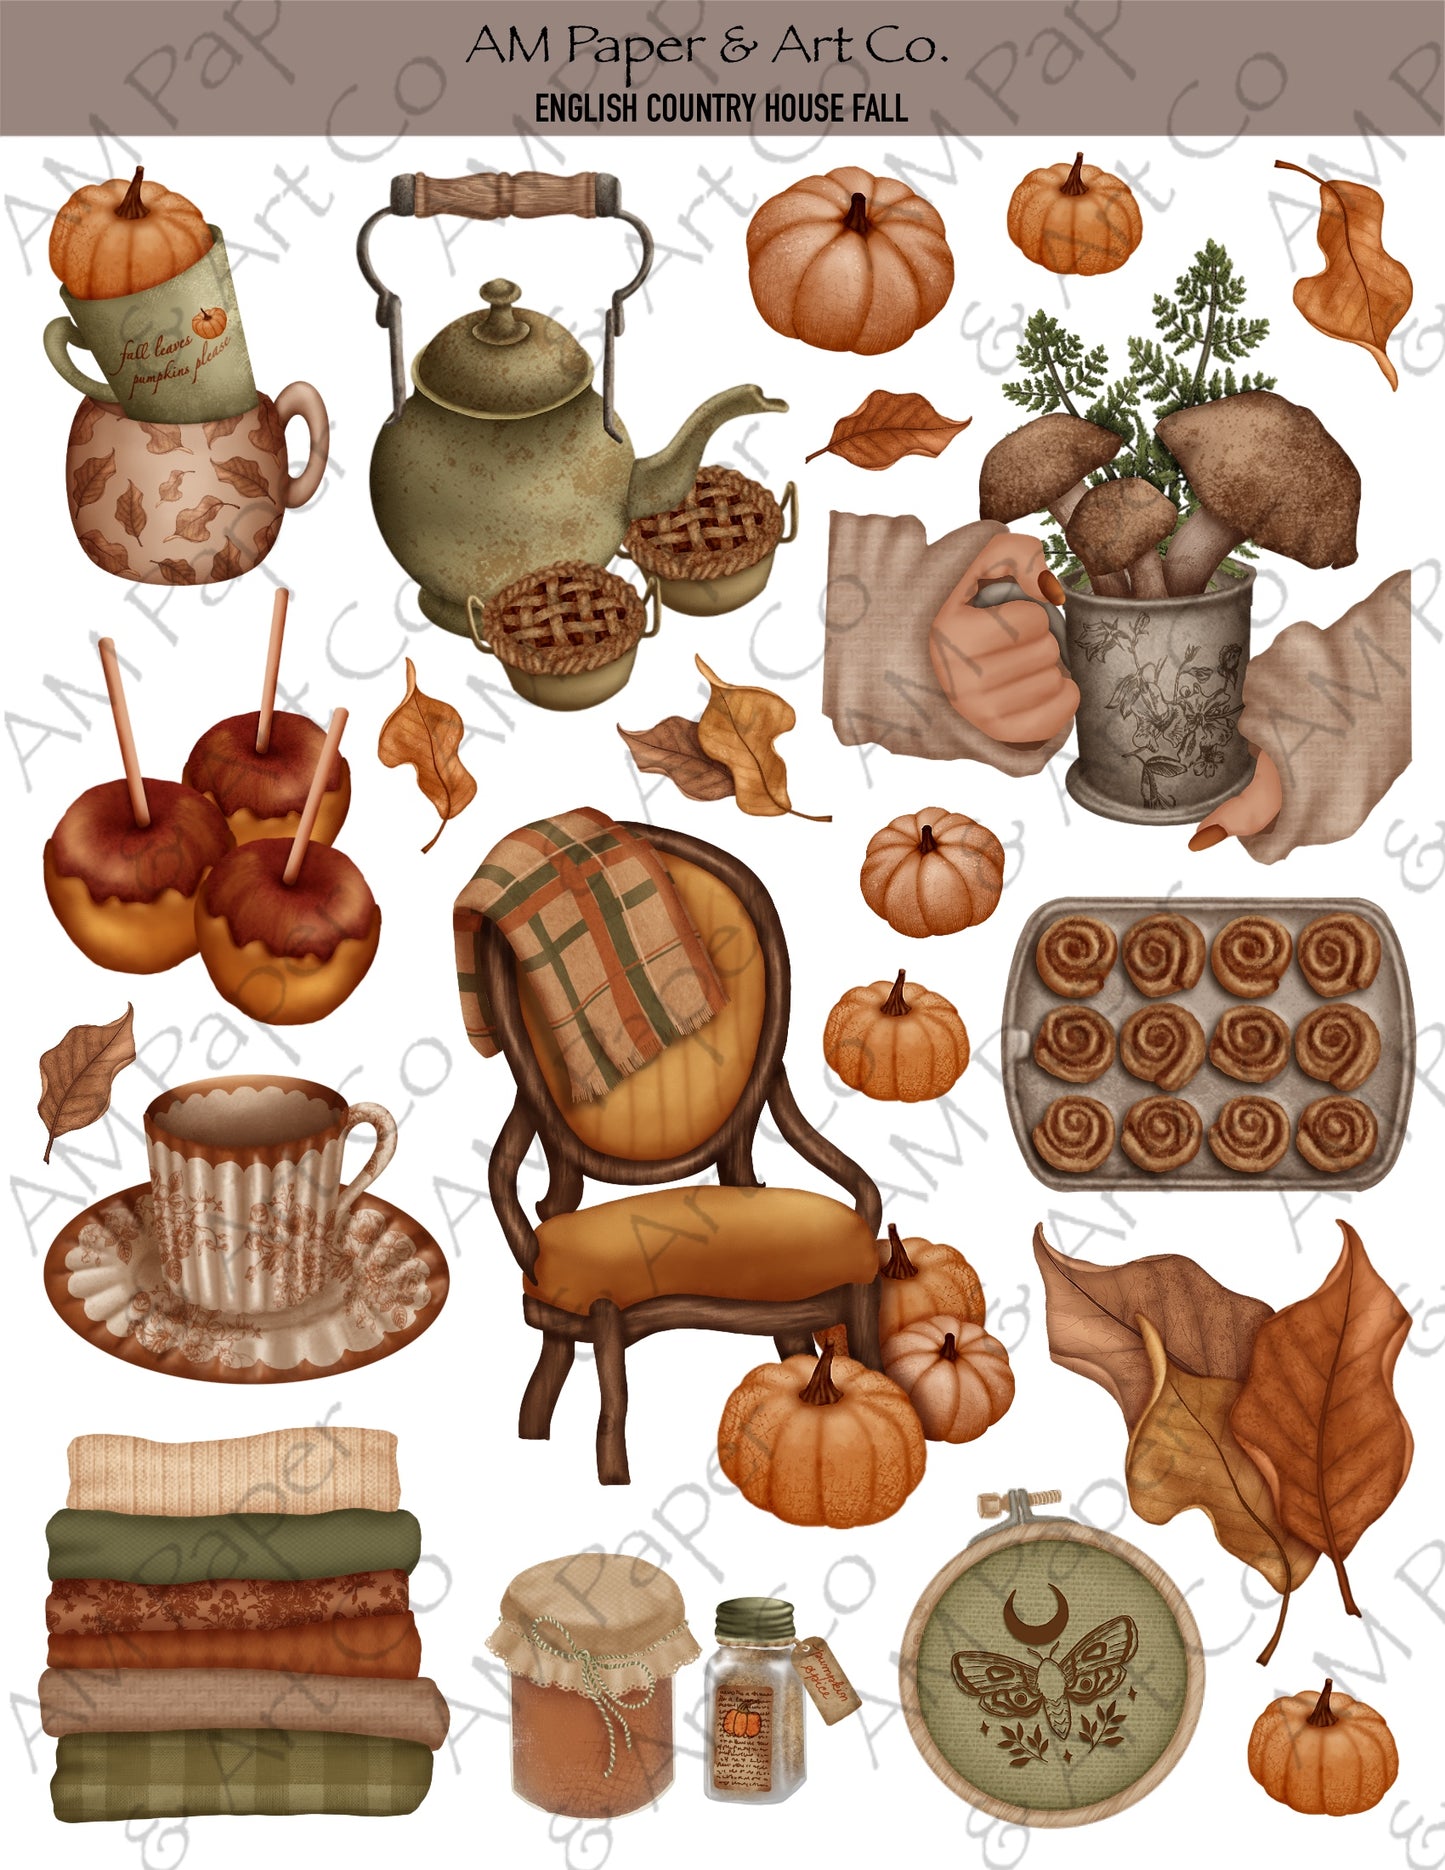 English Country House Fall Stickers